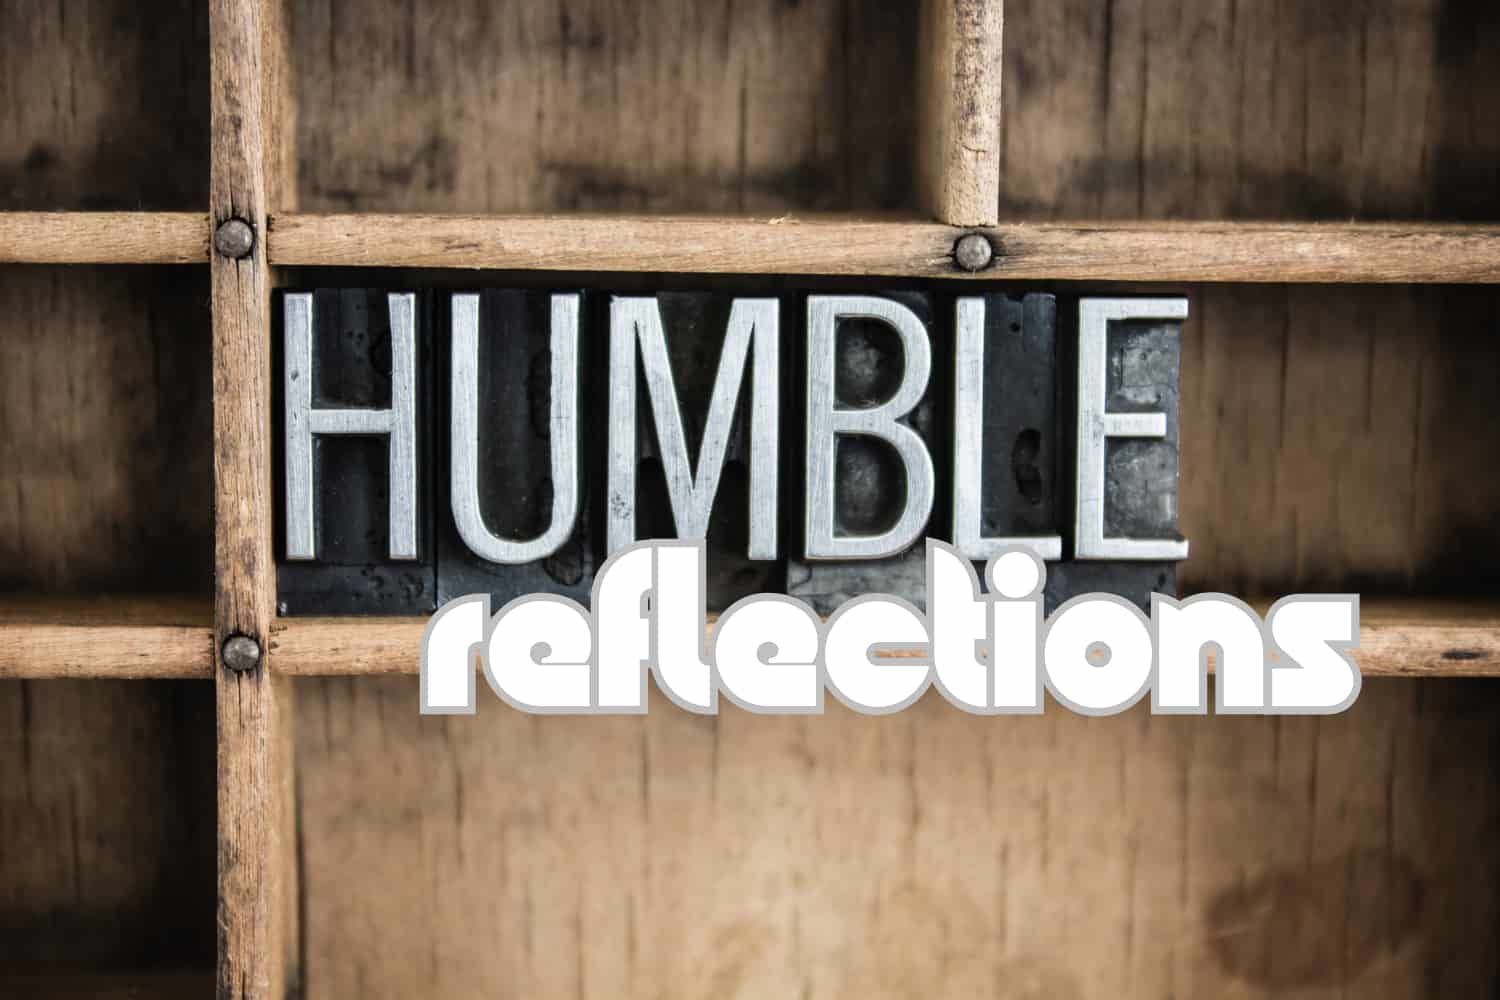 Object%20lesson%20-%20NT%20The%20pharisee%20and%20the%20tax%20collector%20-%20Humble%20reflections-5792de36 Jesus (of Nazareth)